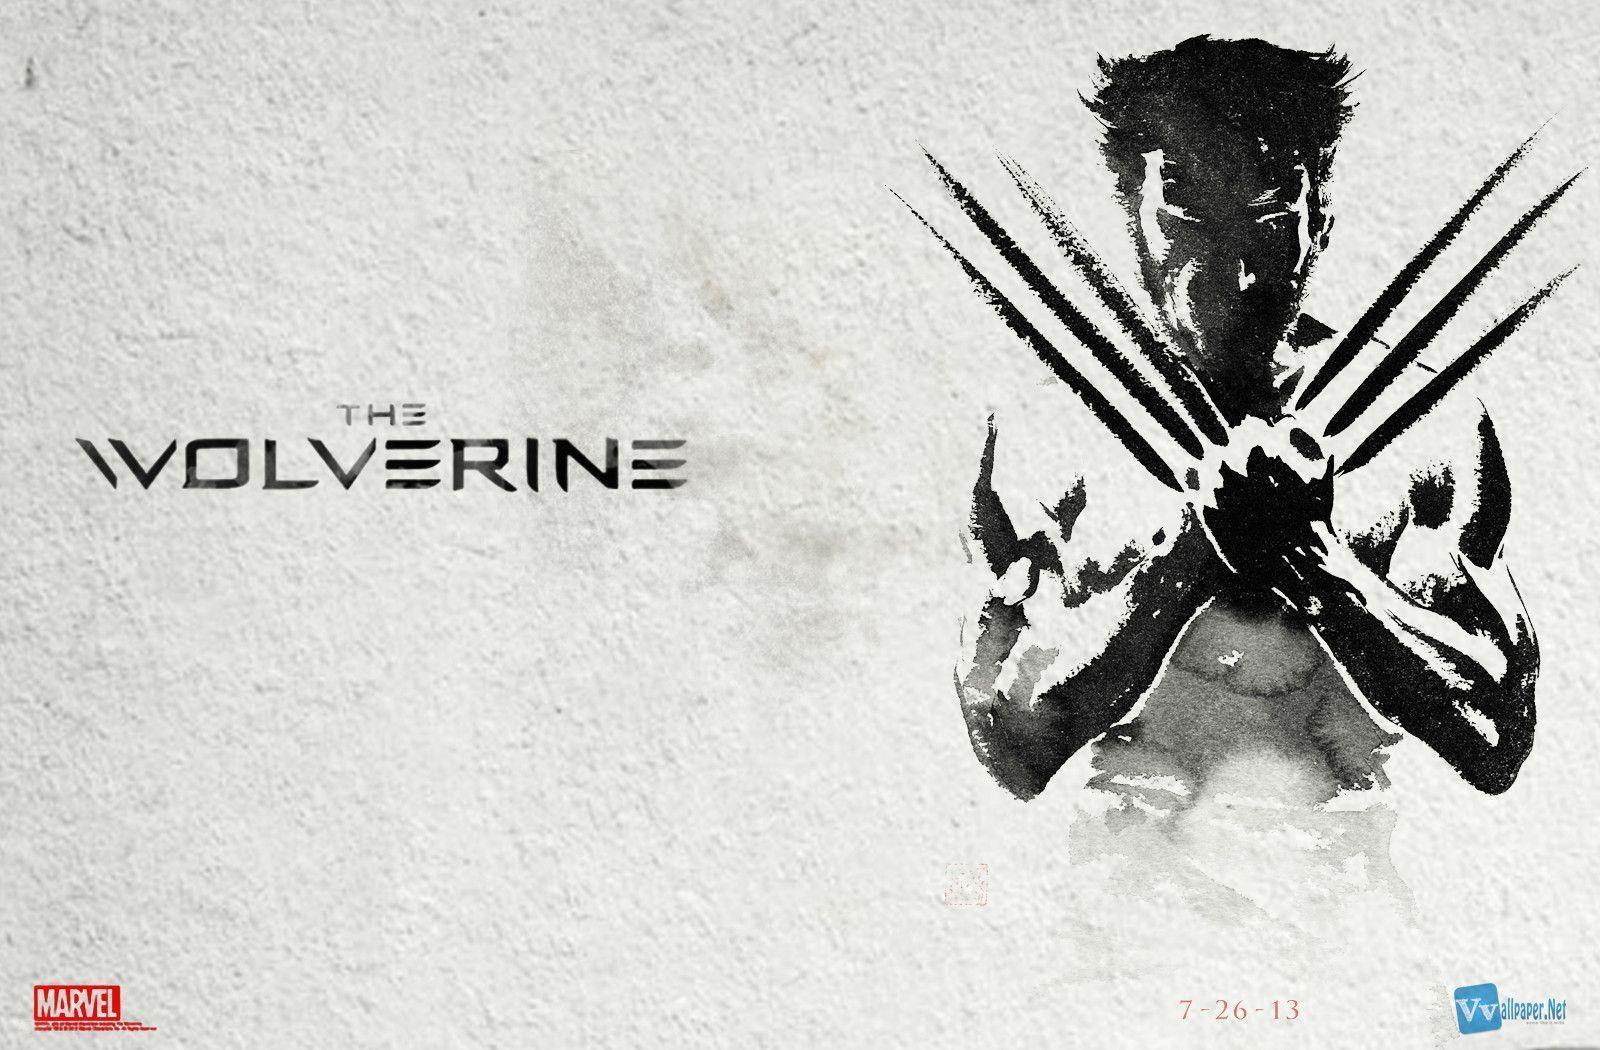 Marvel The Wolverine Movie 2013 HD Wallpaper. The Modern M.A.G.E